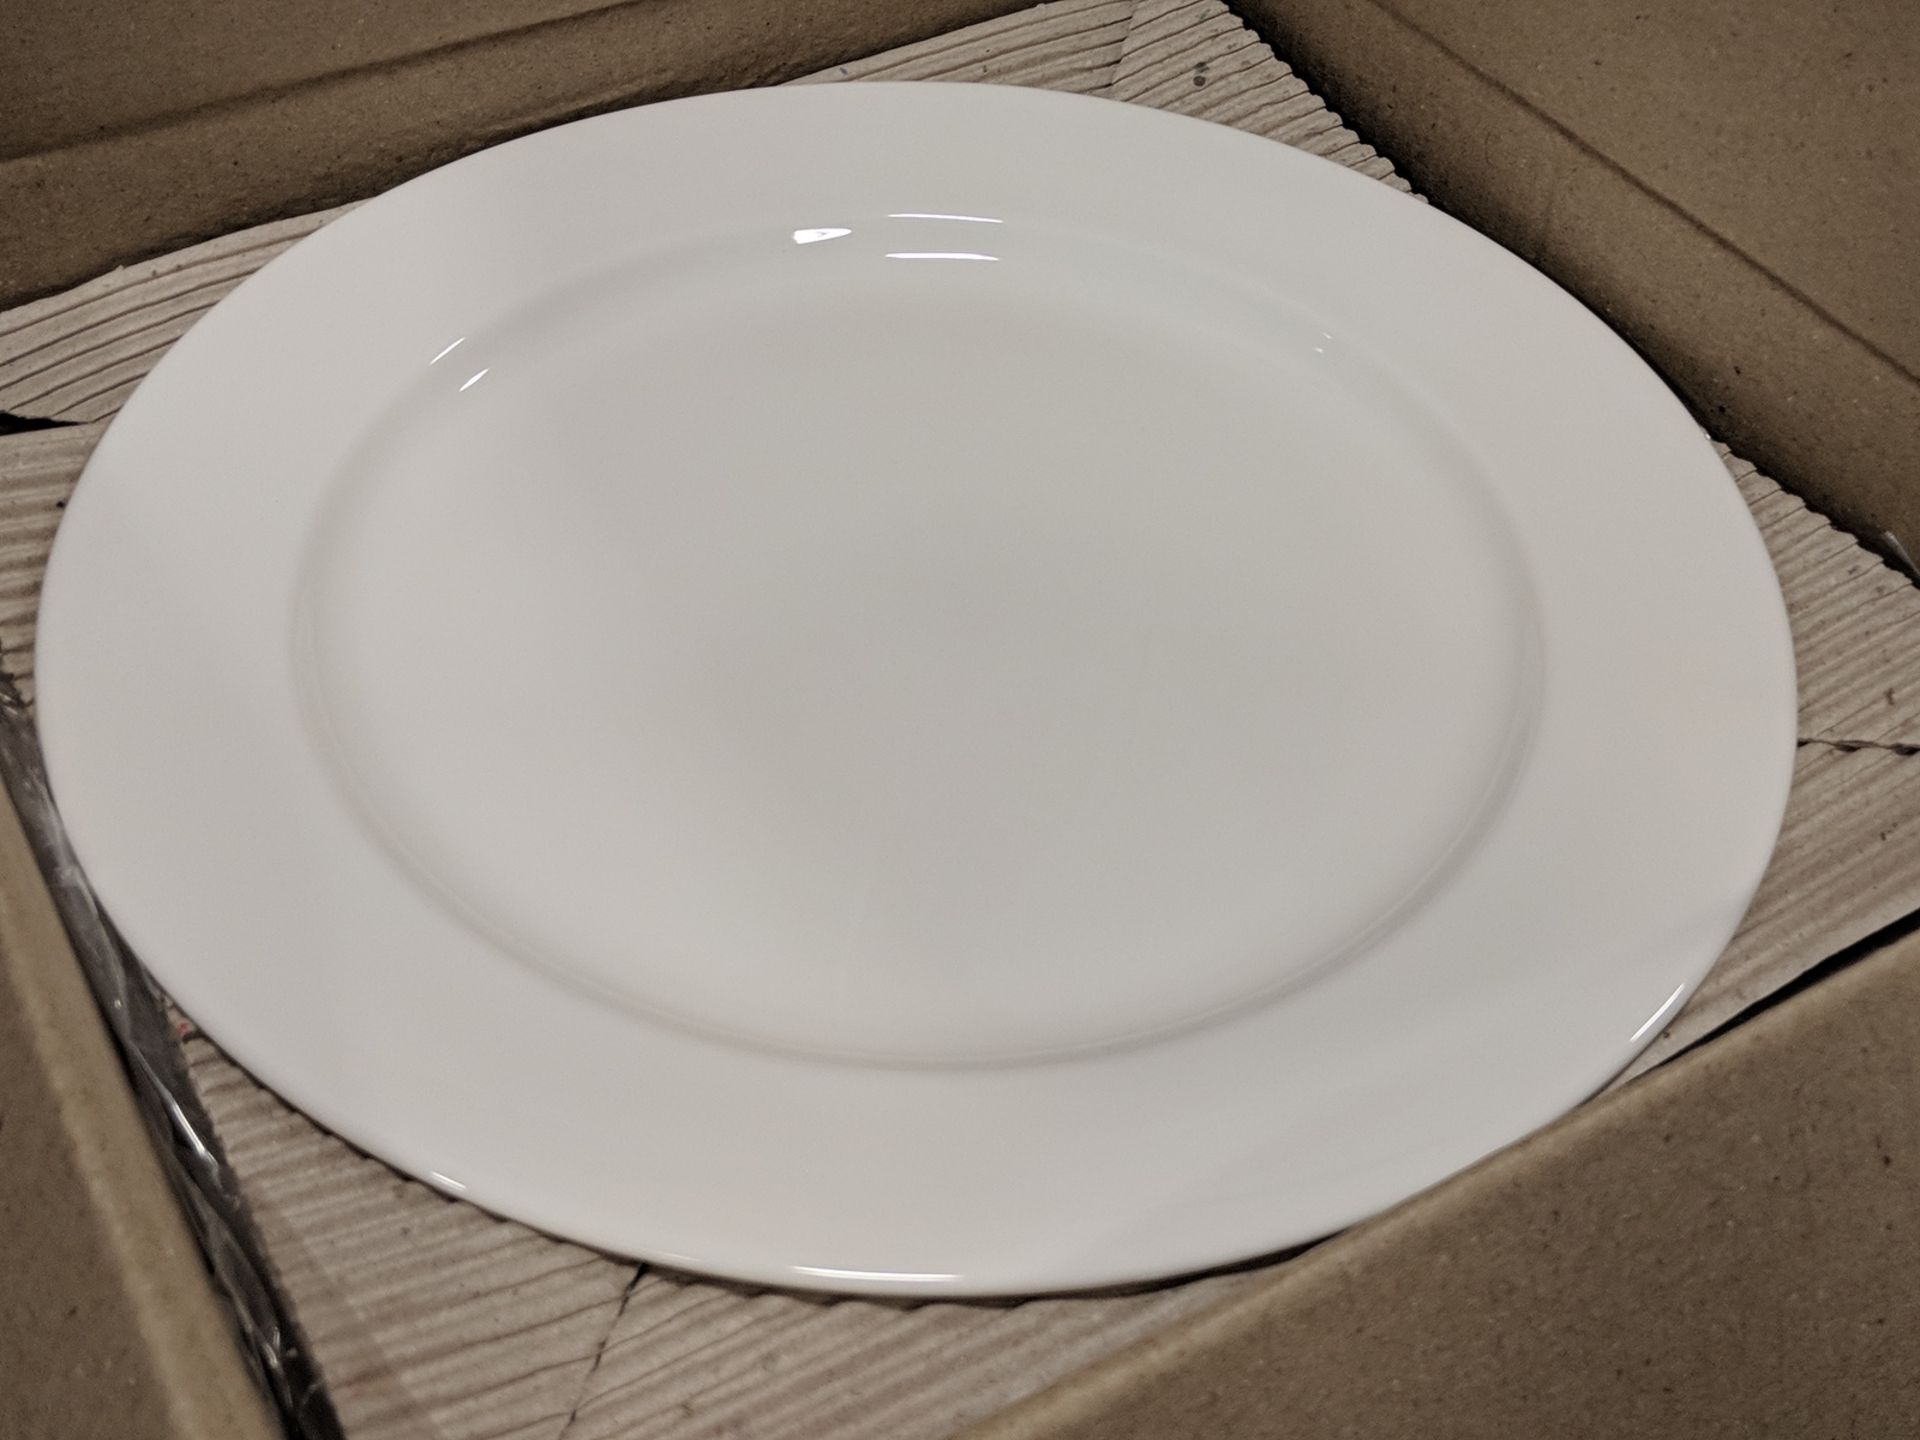 11-7/8" Infinity Service Plates - Lot of 12 (1 Case), Arcoroc R1001